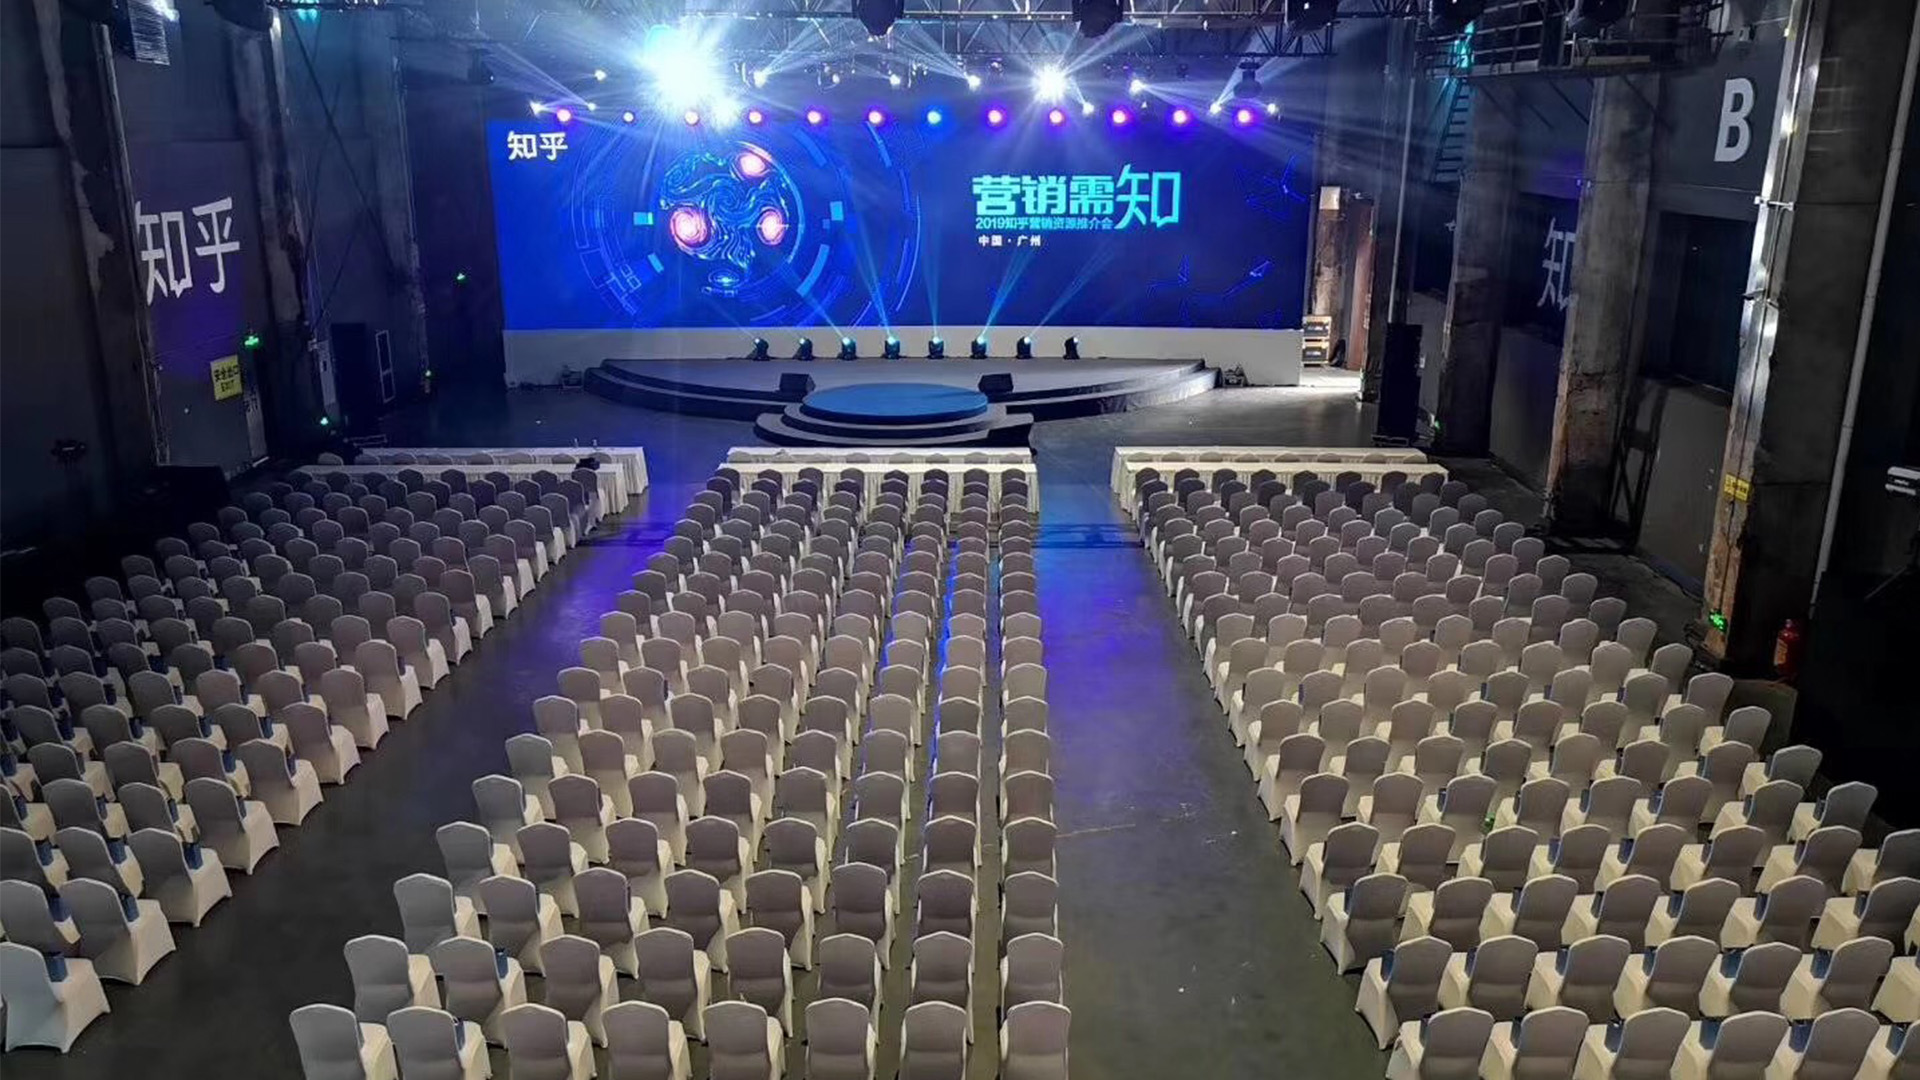 It is an Conference Event and Launching Event for Zhihu by D2 Studio Event Planner Event Agency Event Planner Hong Kong and Guangzhou China who does Event Planning for Conference Event and Launching Event 2